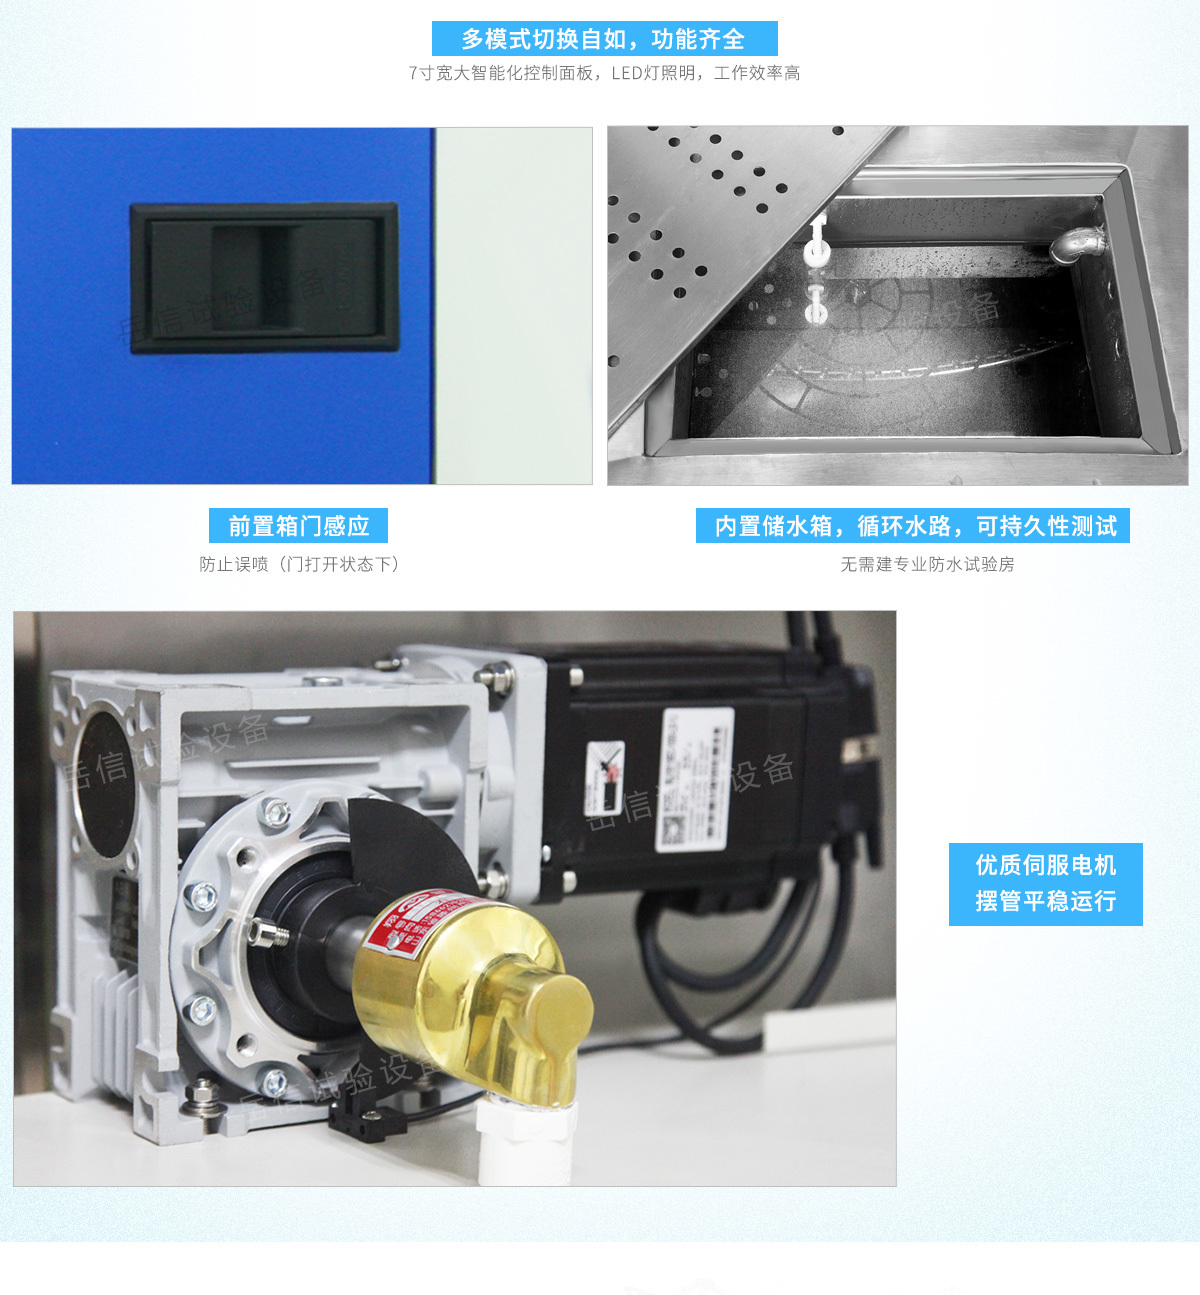 Do you need such waterproof testing equipment?